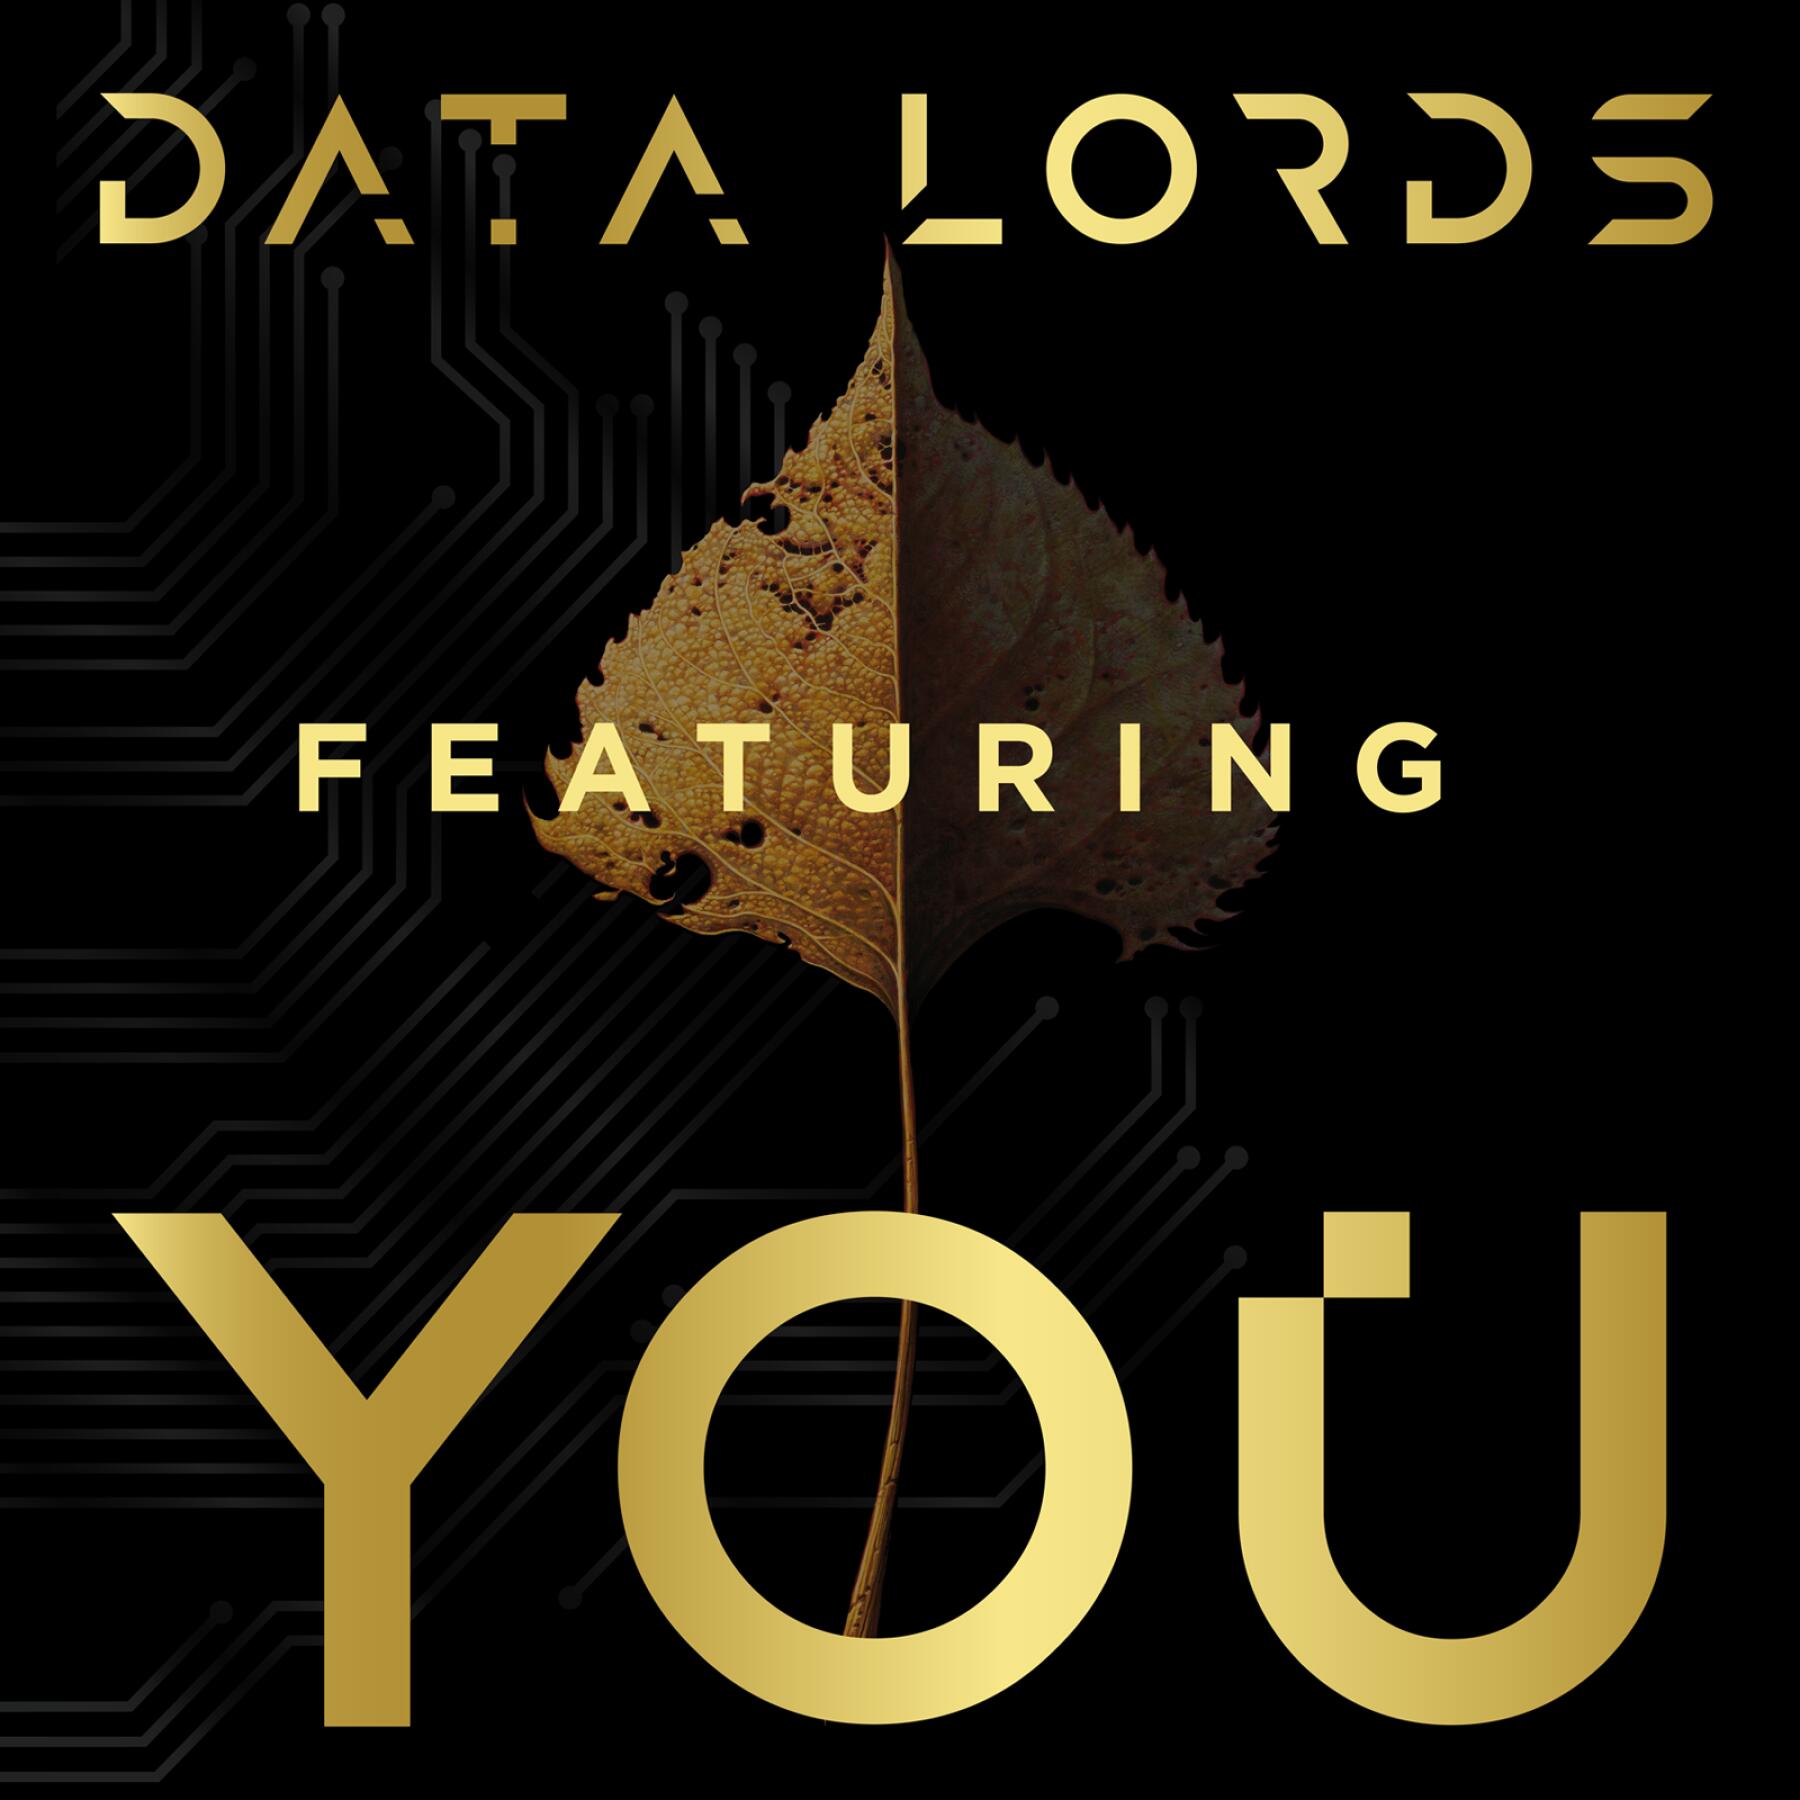 Maria Schneider Orchestra Featuring You - Data Lords